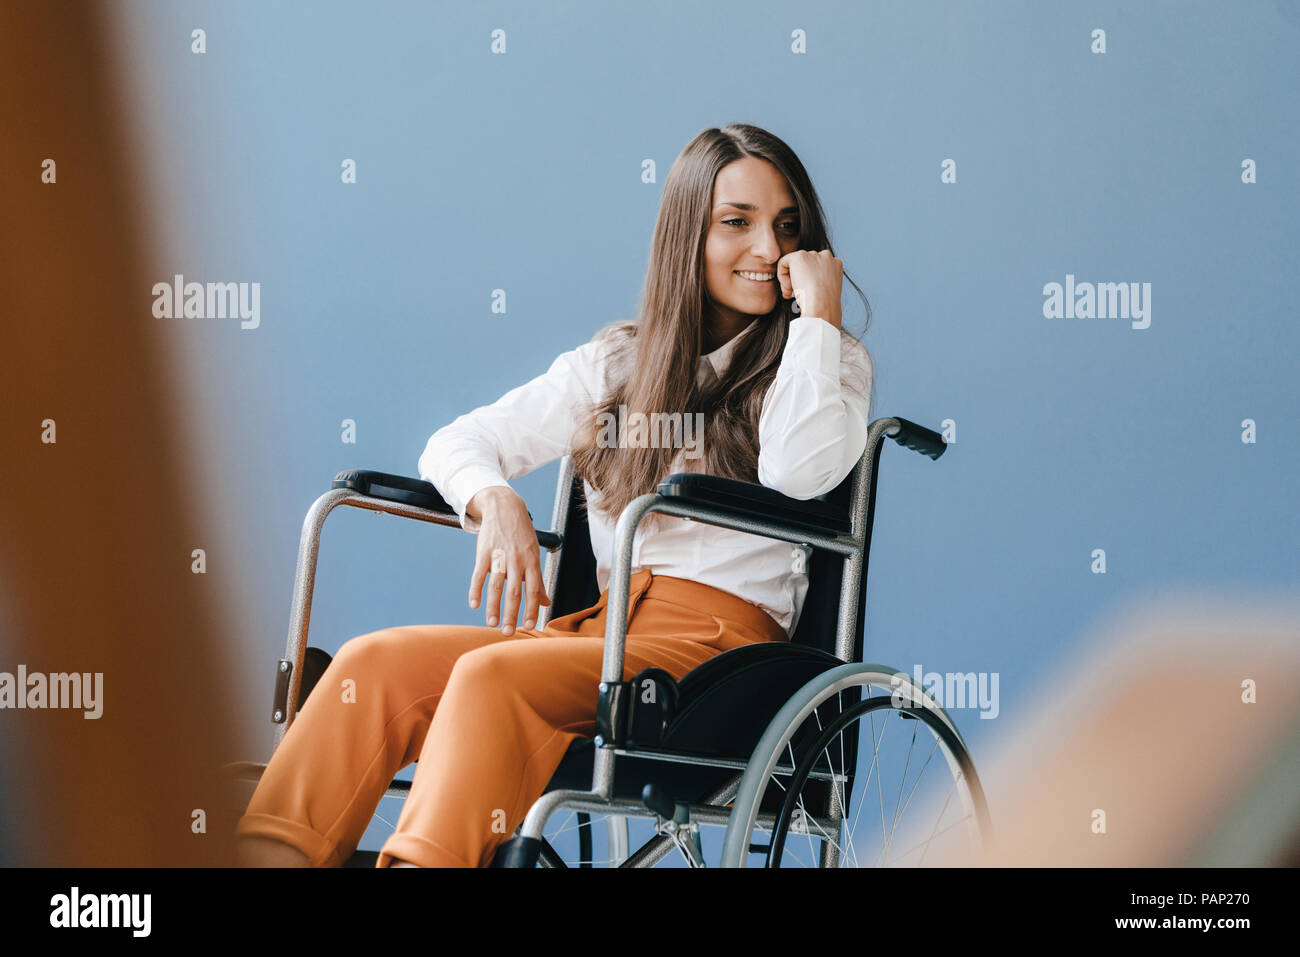 Young handicapped woman sitting in wheelchair, smiling Stock Photo